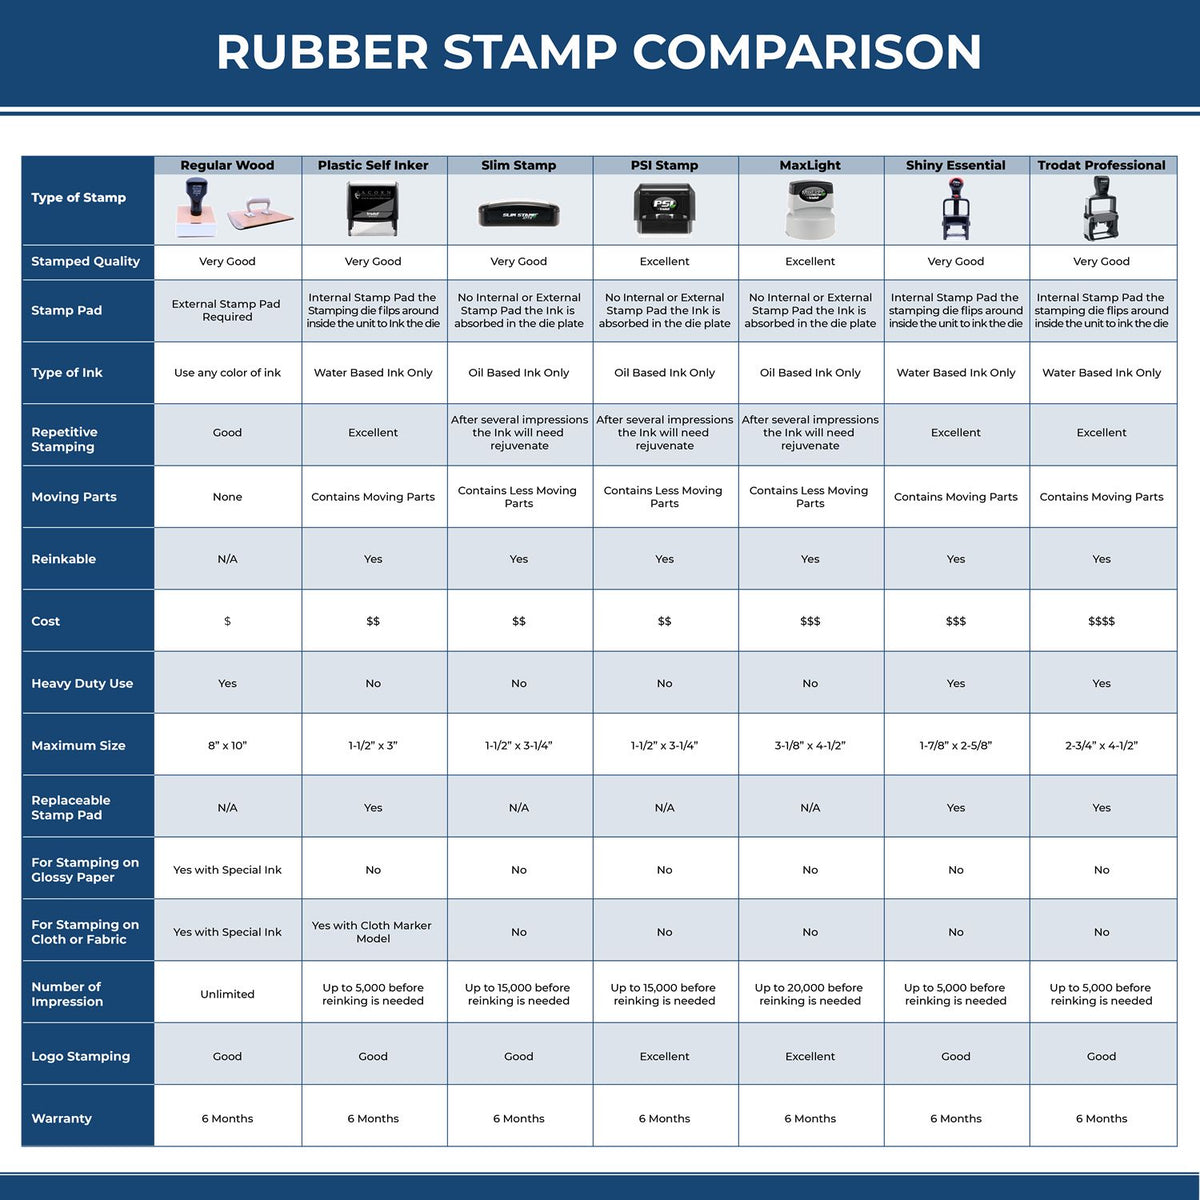 Large Hold Notice Rubber Stamp 4571R Rubber Stamp Comparison